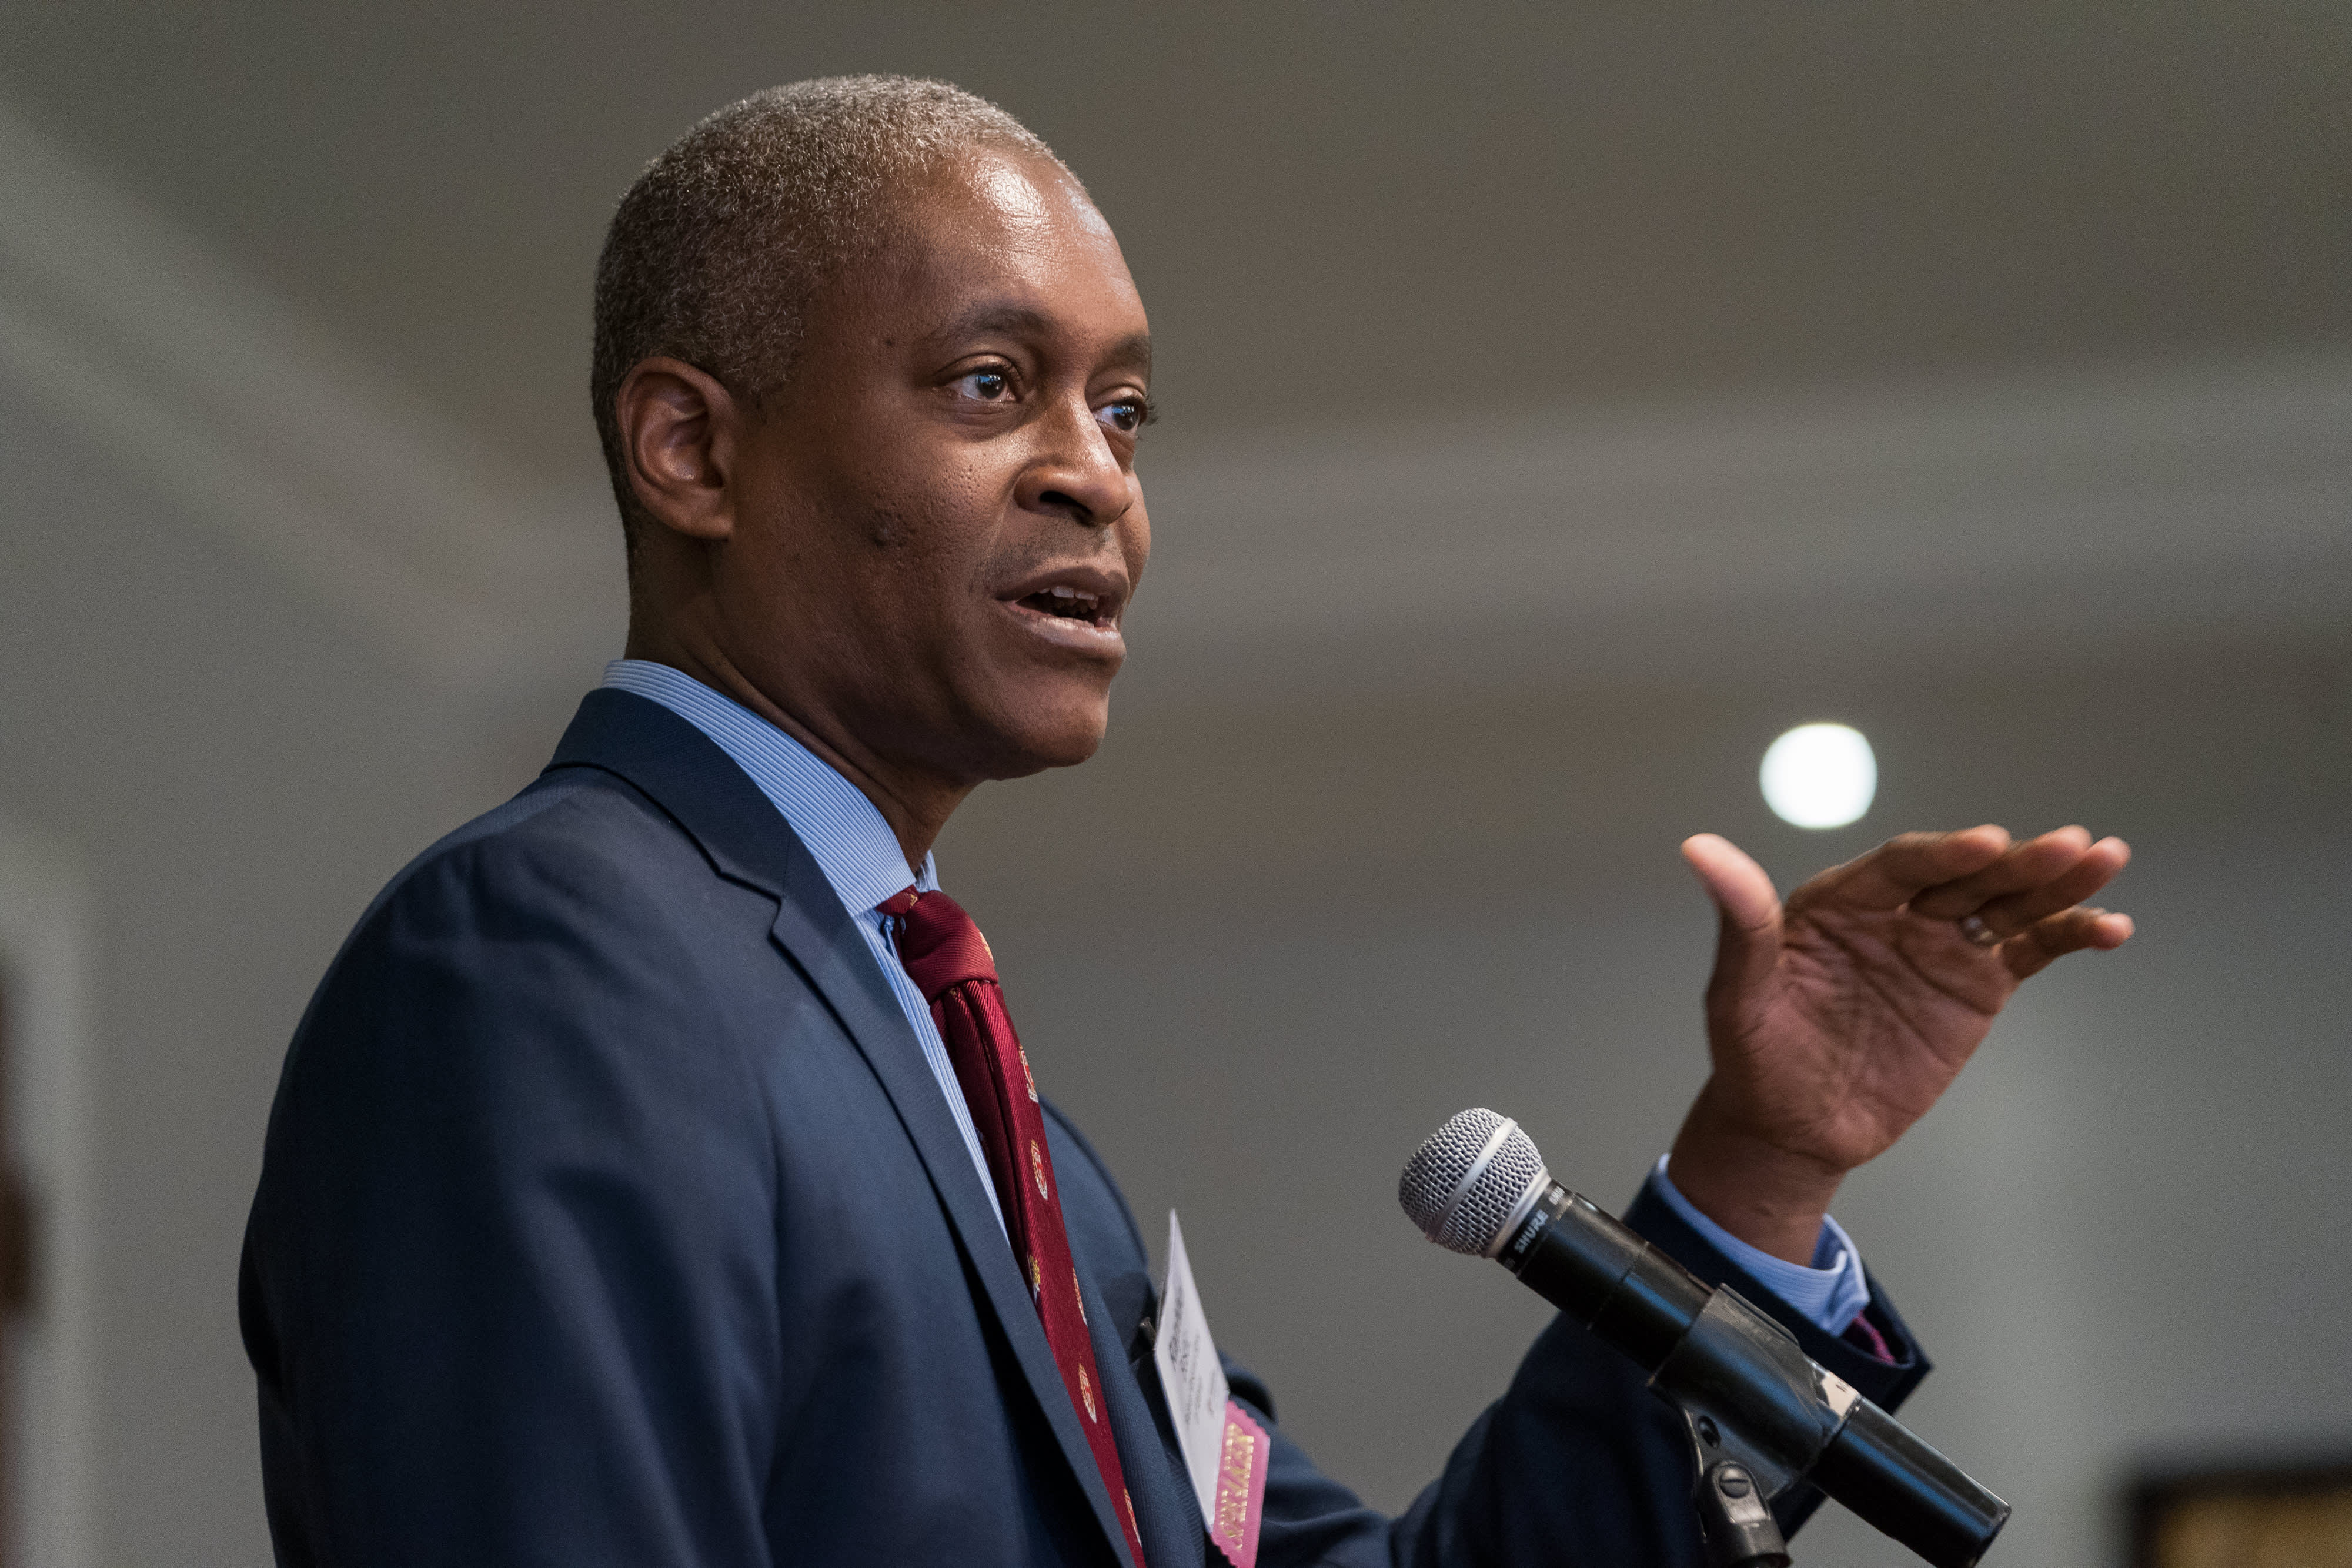 Fed’s Bostic says he remains open to faster taper and one or two rate hikes in 2022